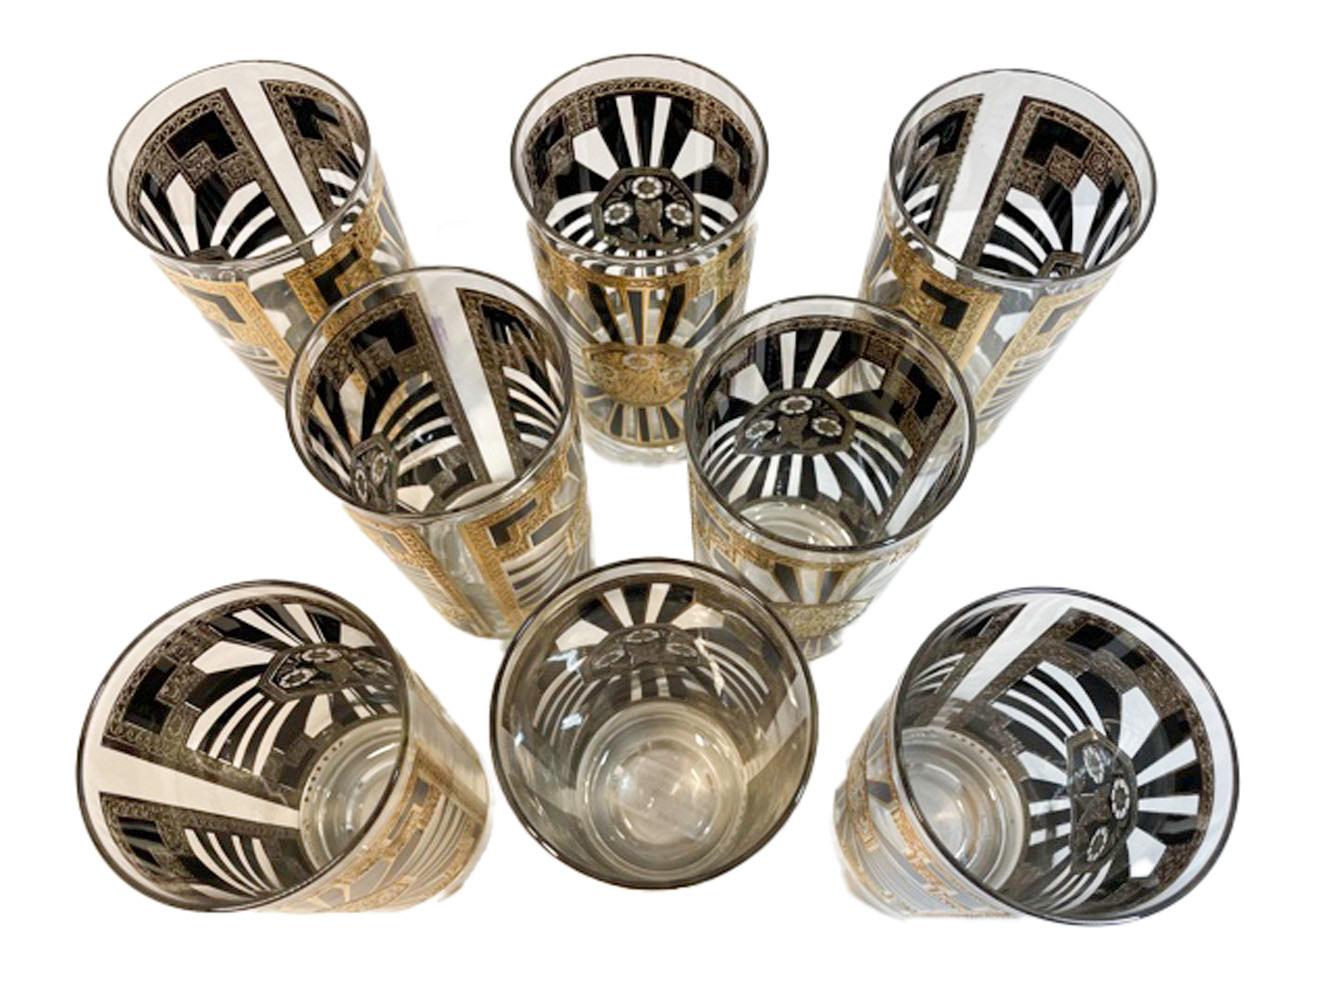 Mid-Century Modern, set of 8 highball glasses designed by Georges Briard in the Art Deco pattern of Classic motifs executed in black enamel and 22k gold with platinum details.